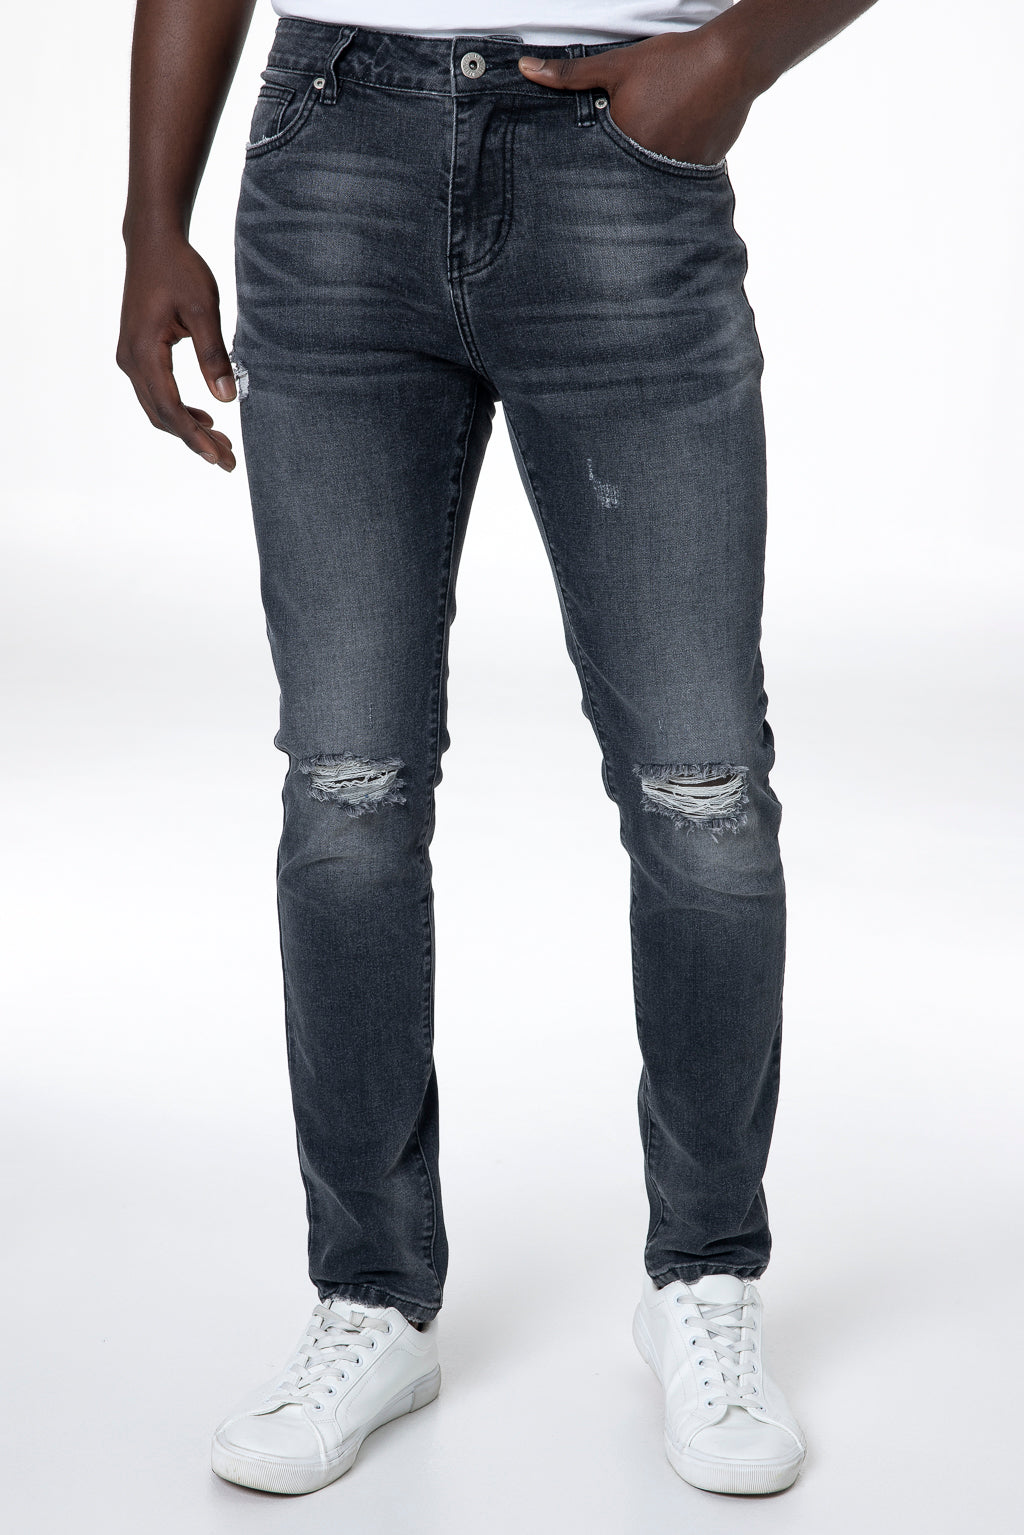 Rf02 Ripped Skinny Jeans _ 142681 _ Black Wash from REFINERY – Refinery